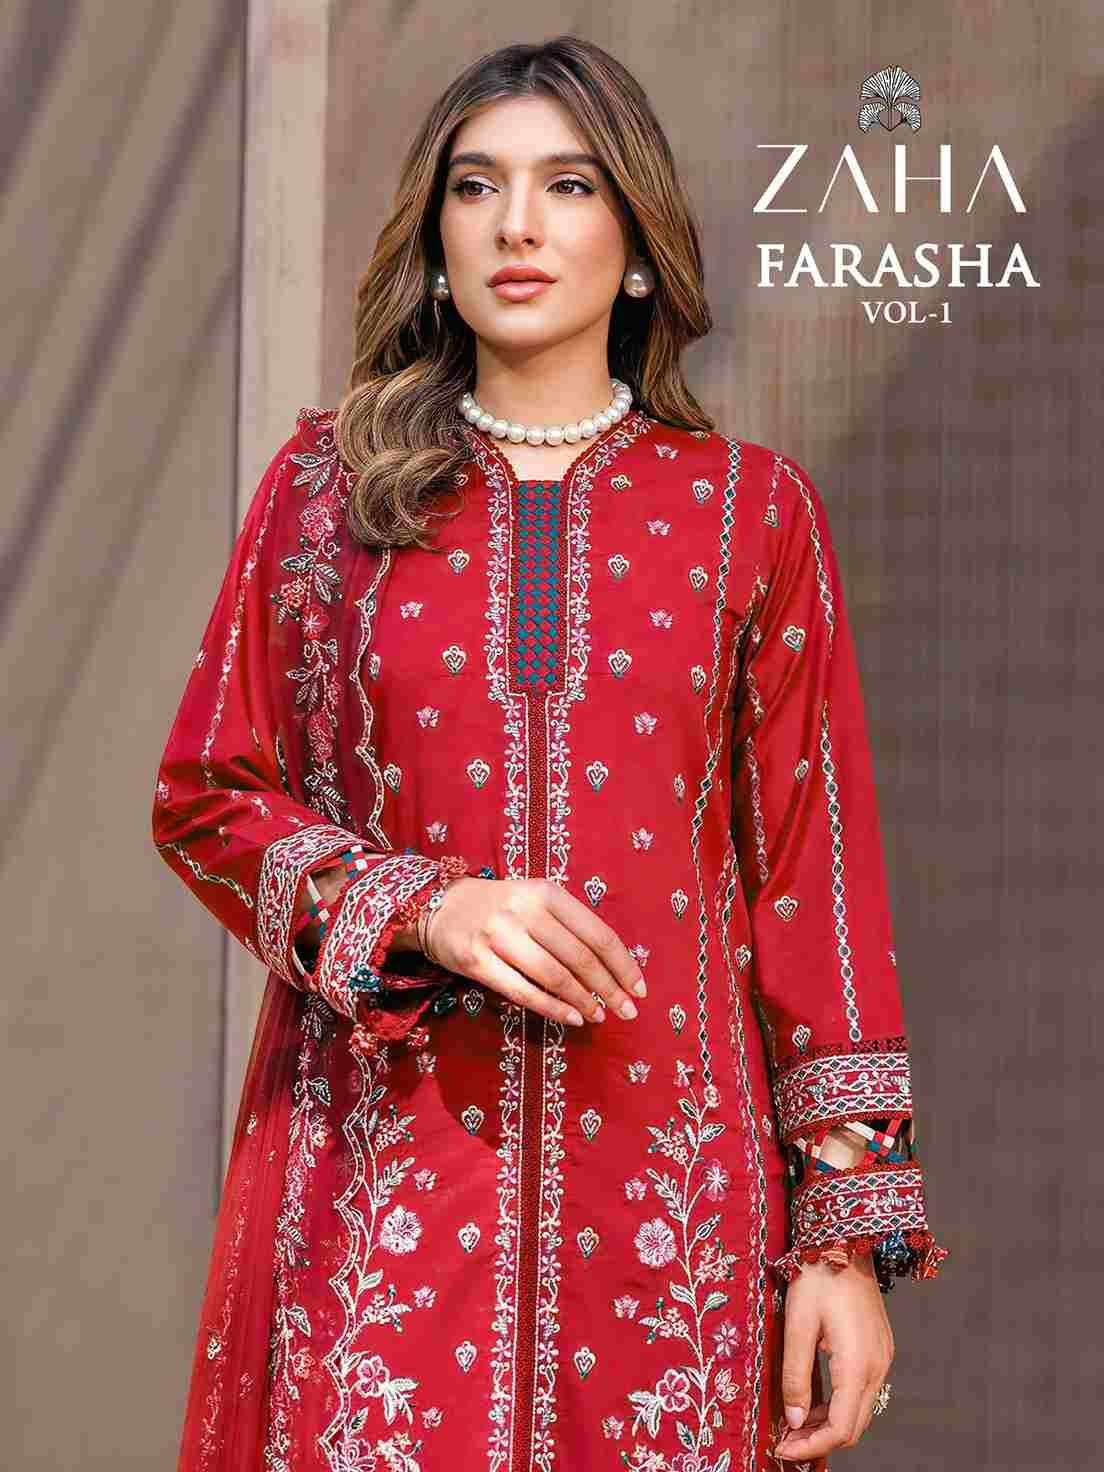 Farasha Vol -1 By Zaha 10314 To 10317 Series Beautiful Pakistani Suits Stylish Fancy Colorful Party Wear & Occasional Wear Cambric Cotton With Embroidery Dresses At Wholesale Price